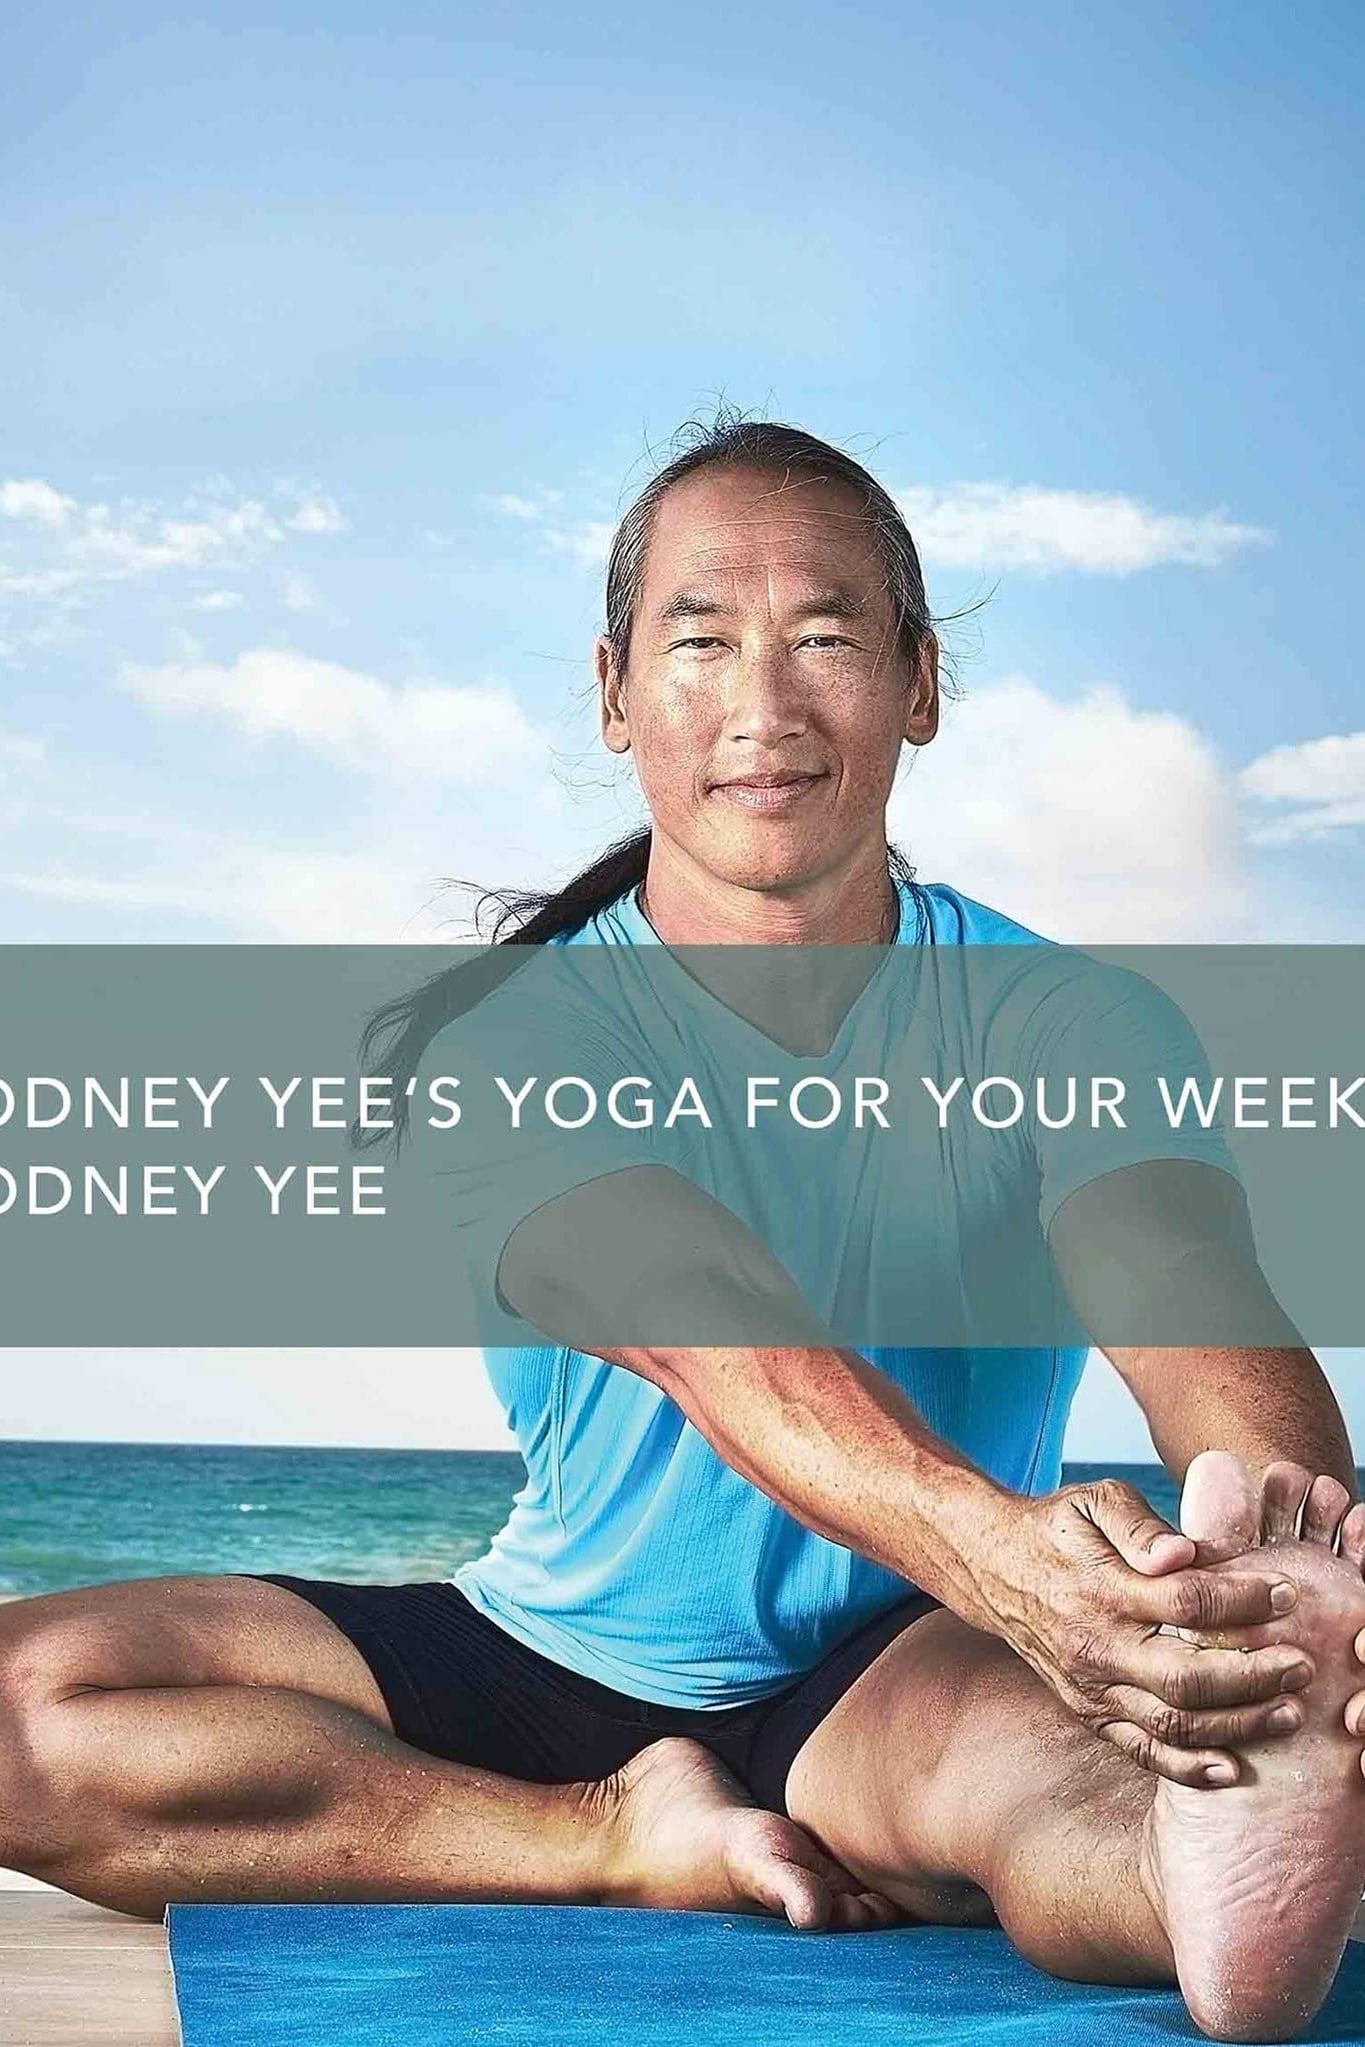 Rodney Yee's Yoga for Your Week: A.M. Connection